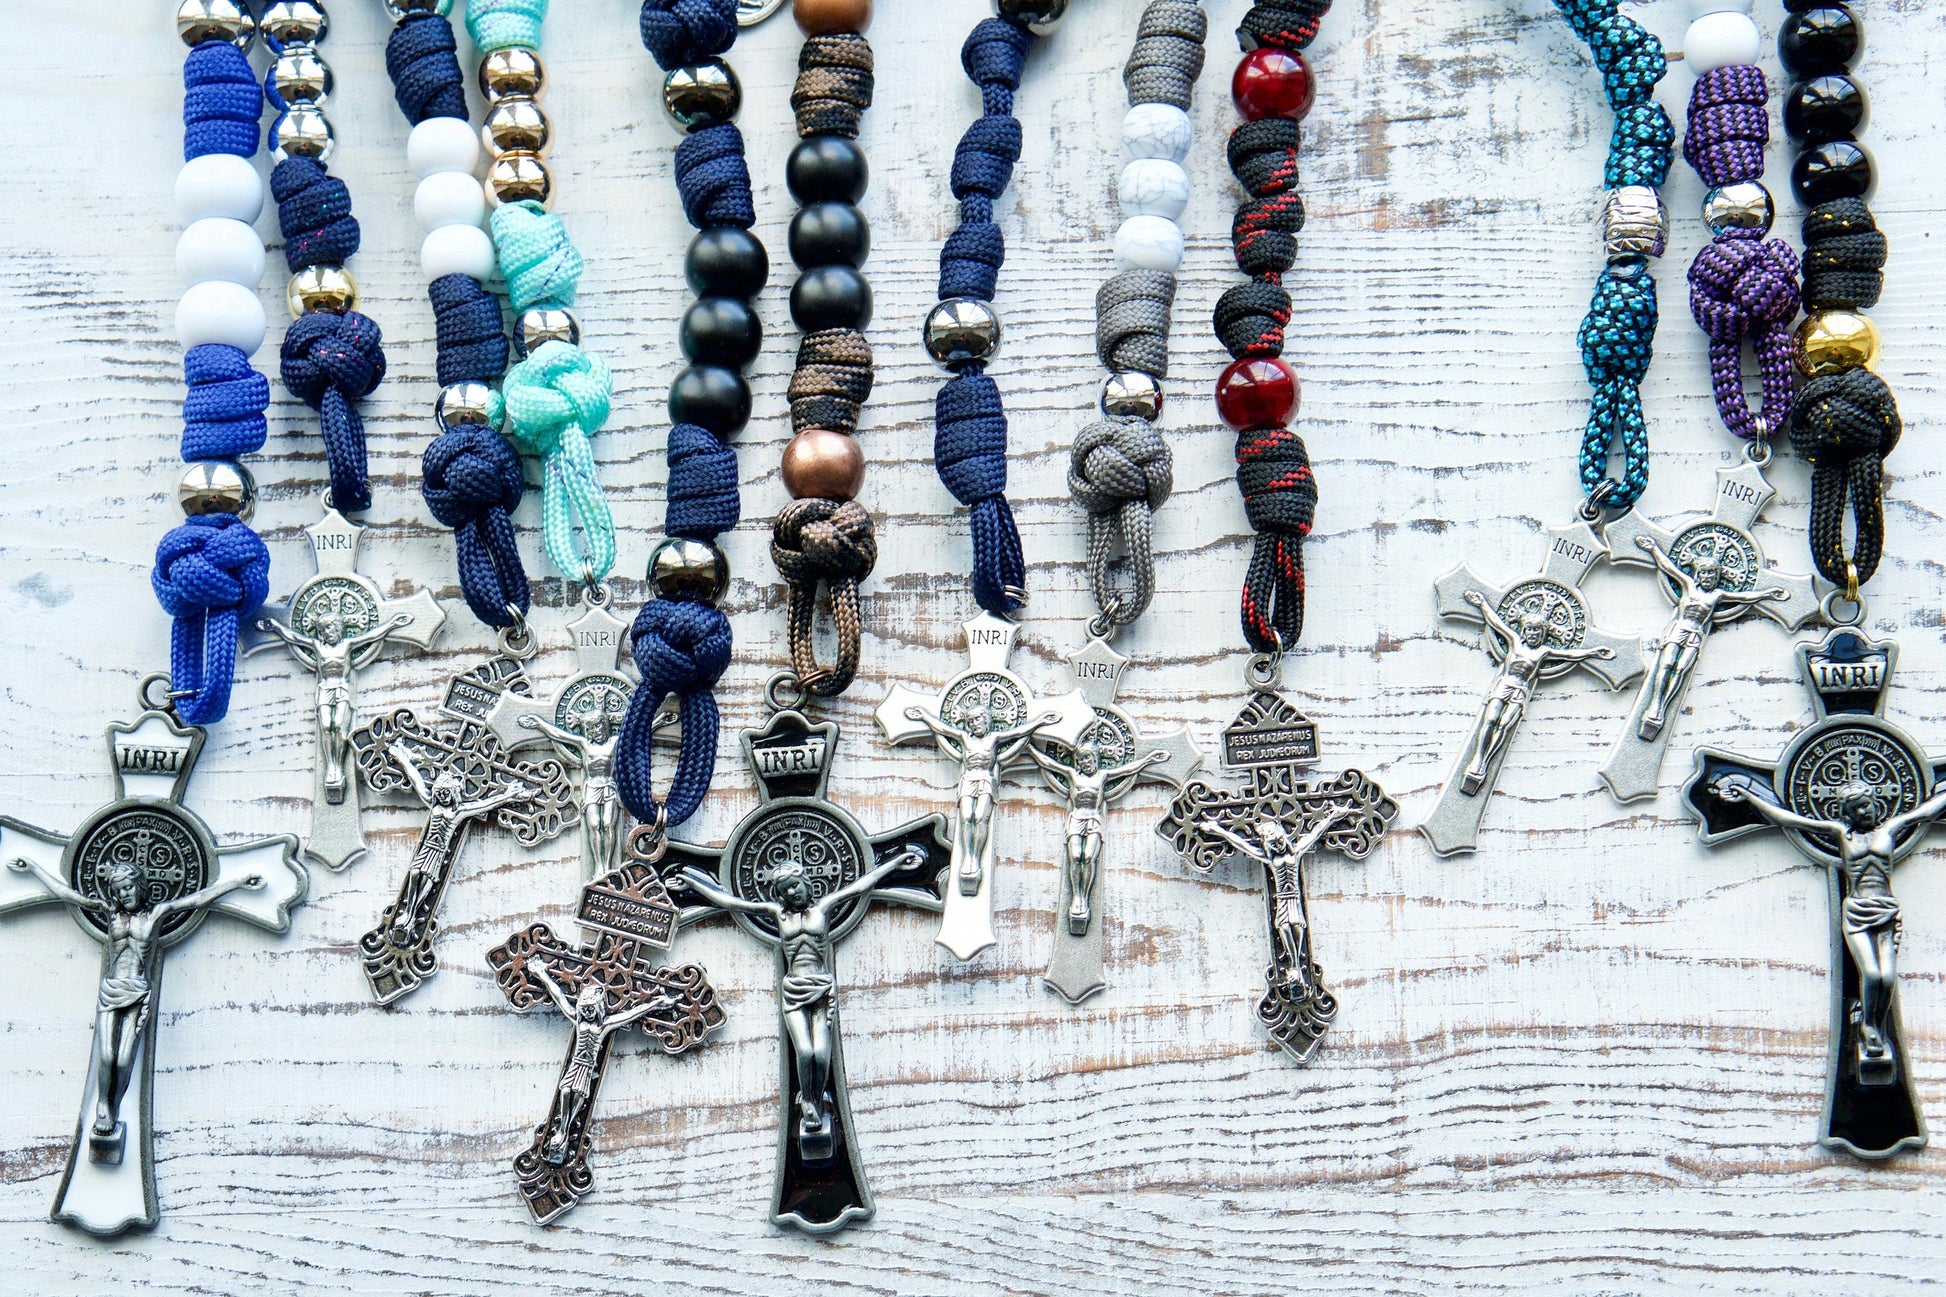 Customize your faith and style with this 5 Decade Paracord Rosary. Create a unique gift or personalized rosary for yourself. Let us bring your vision to life with our premium, unbreakable paracord rosary designs.